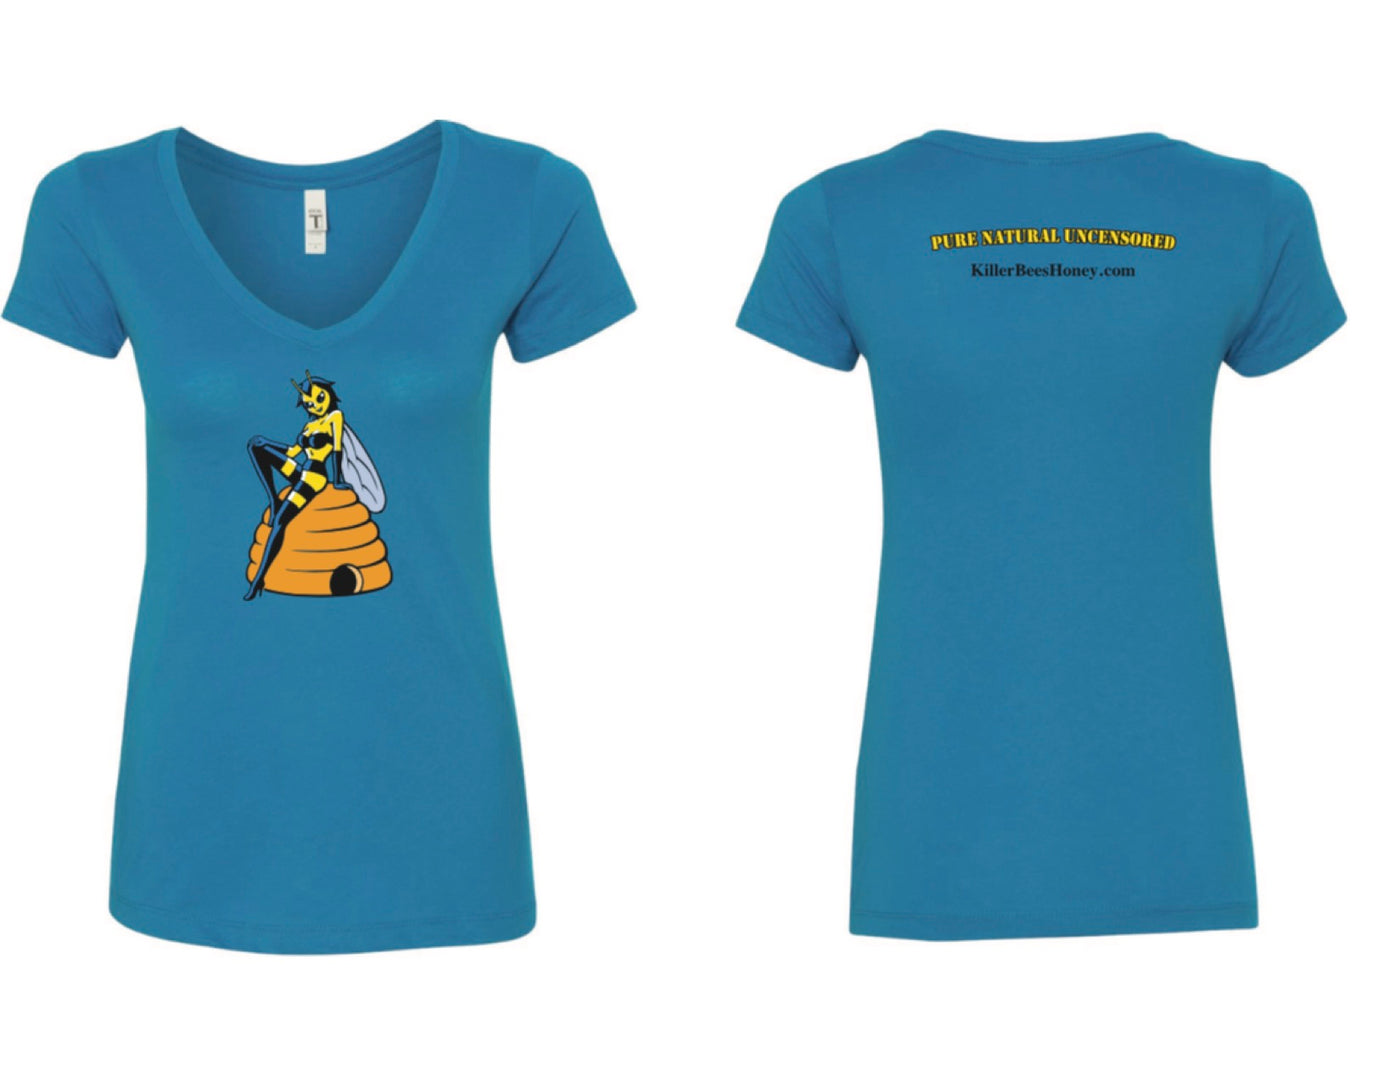 Women's "Pure, Natural, Uncensored" Killer Queen Bee T-Shirt - Turquoise